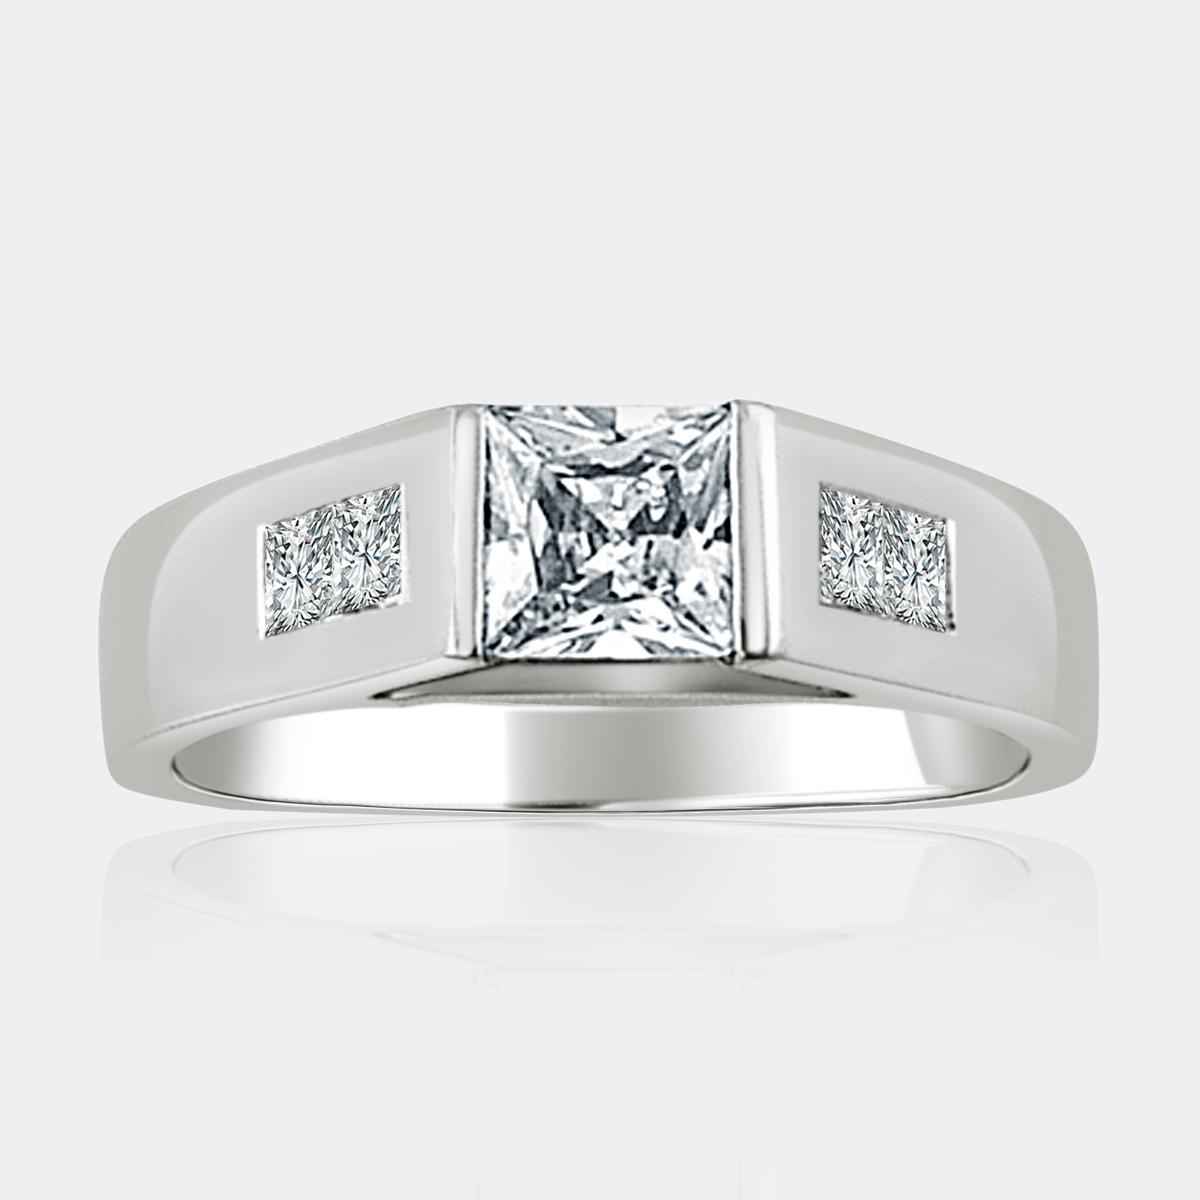 0.70 carat Princess cut diamond ring with princess cut diamond in the shoulders and square based band.